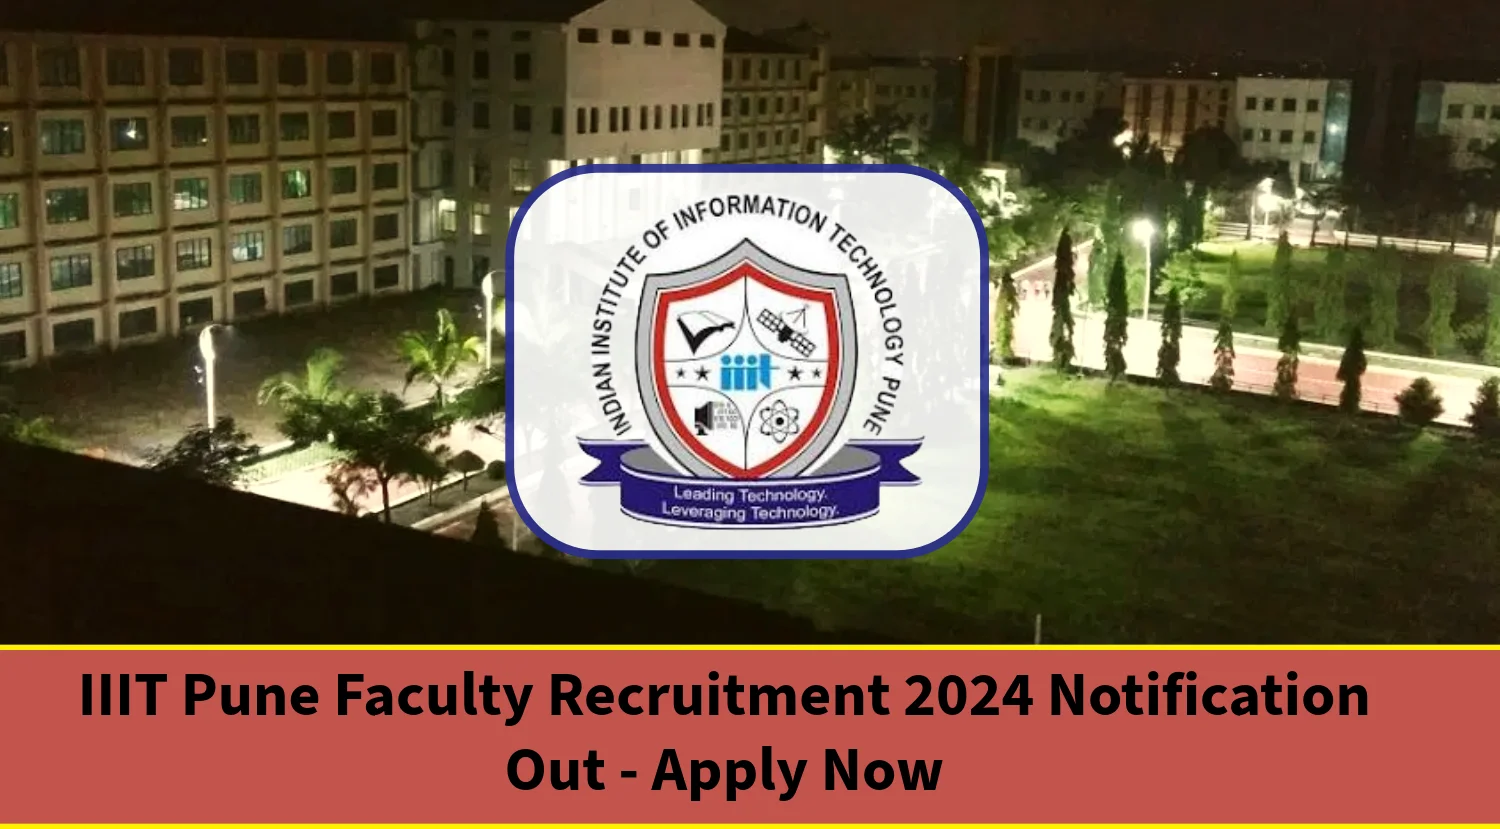 IIIT Pune Faculty Recruitment 2024 Notification Out